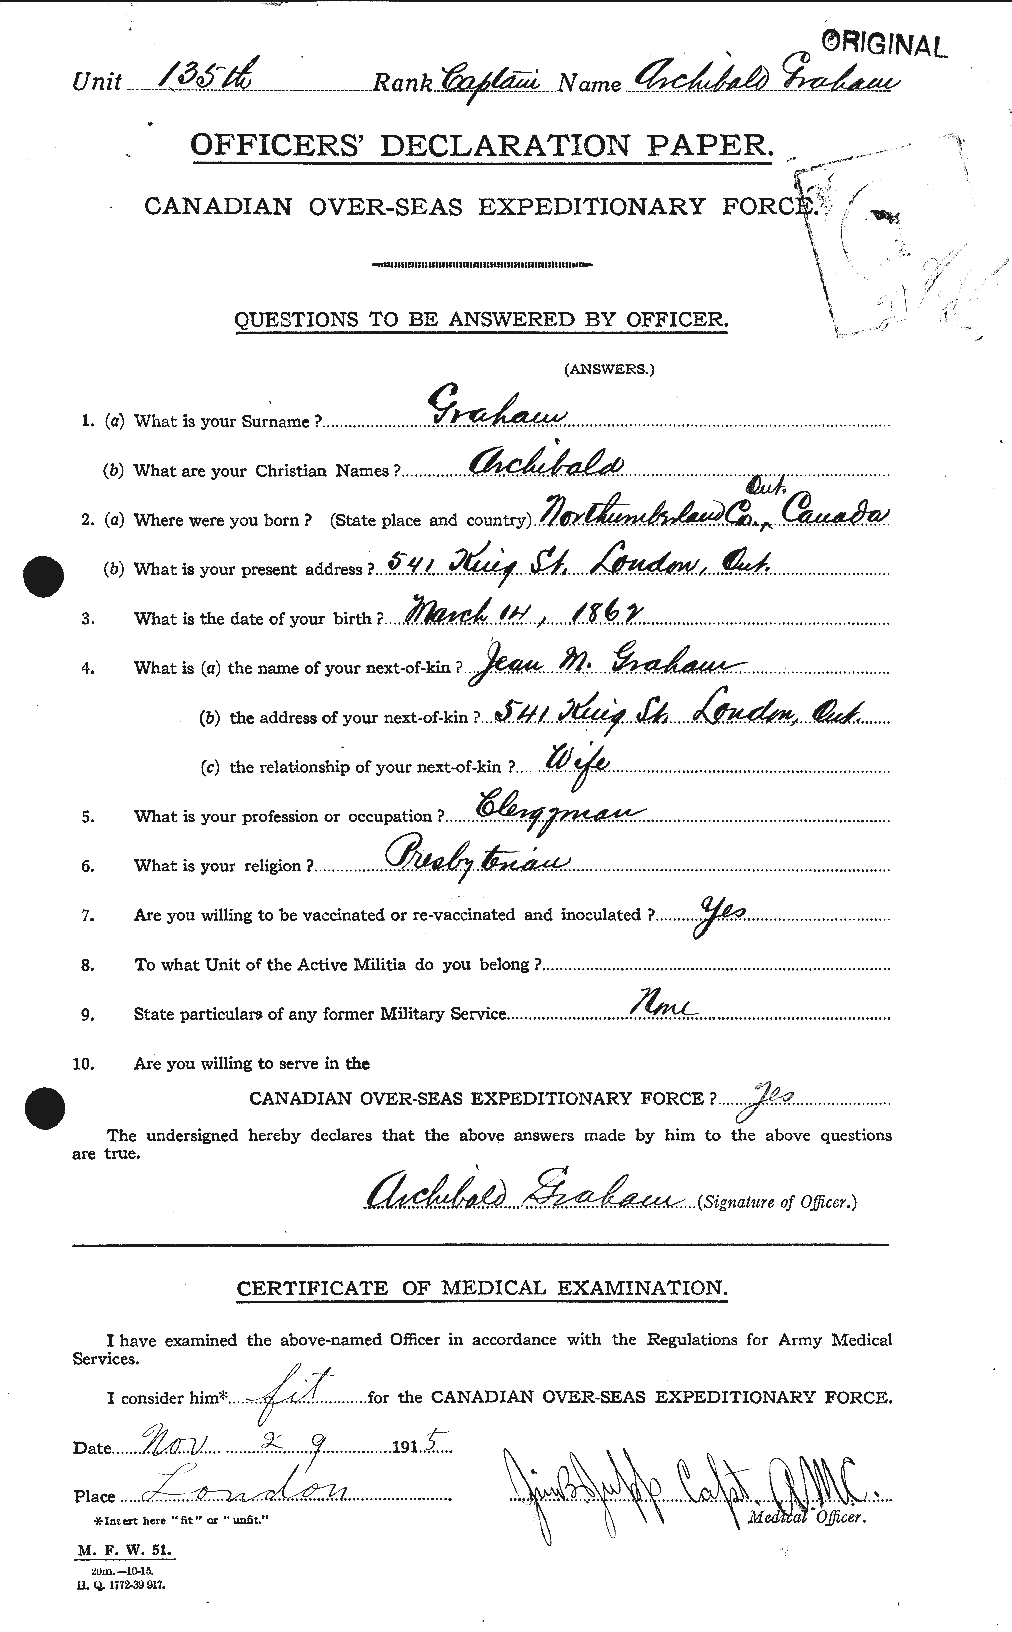 Personnel Records of the First World War - CEF 359631a